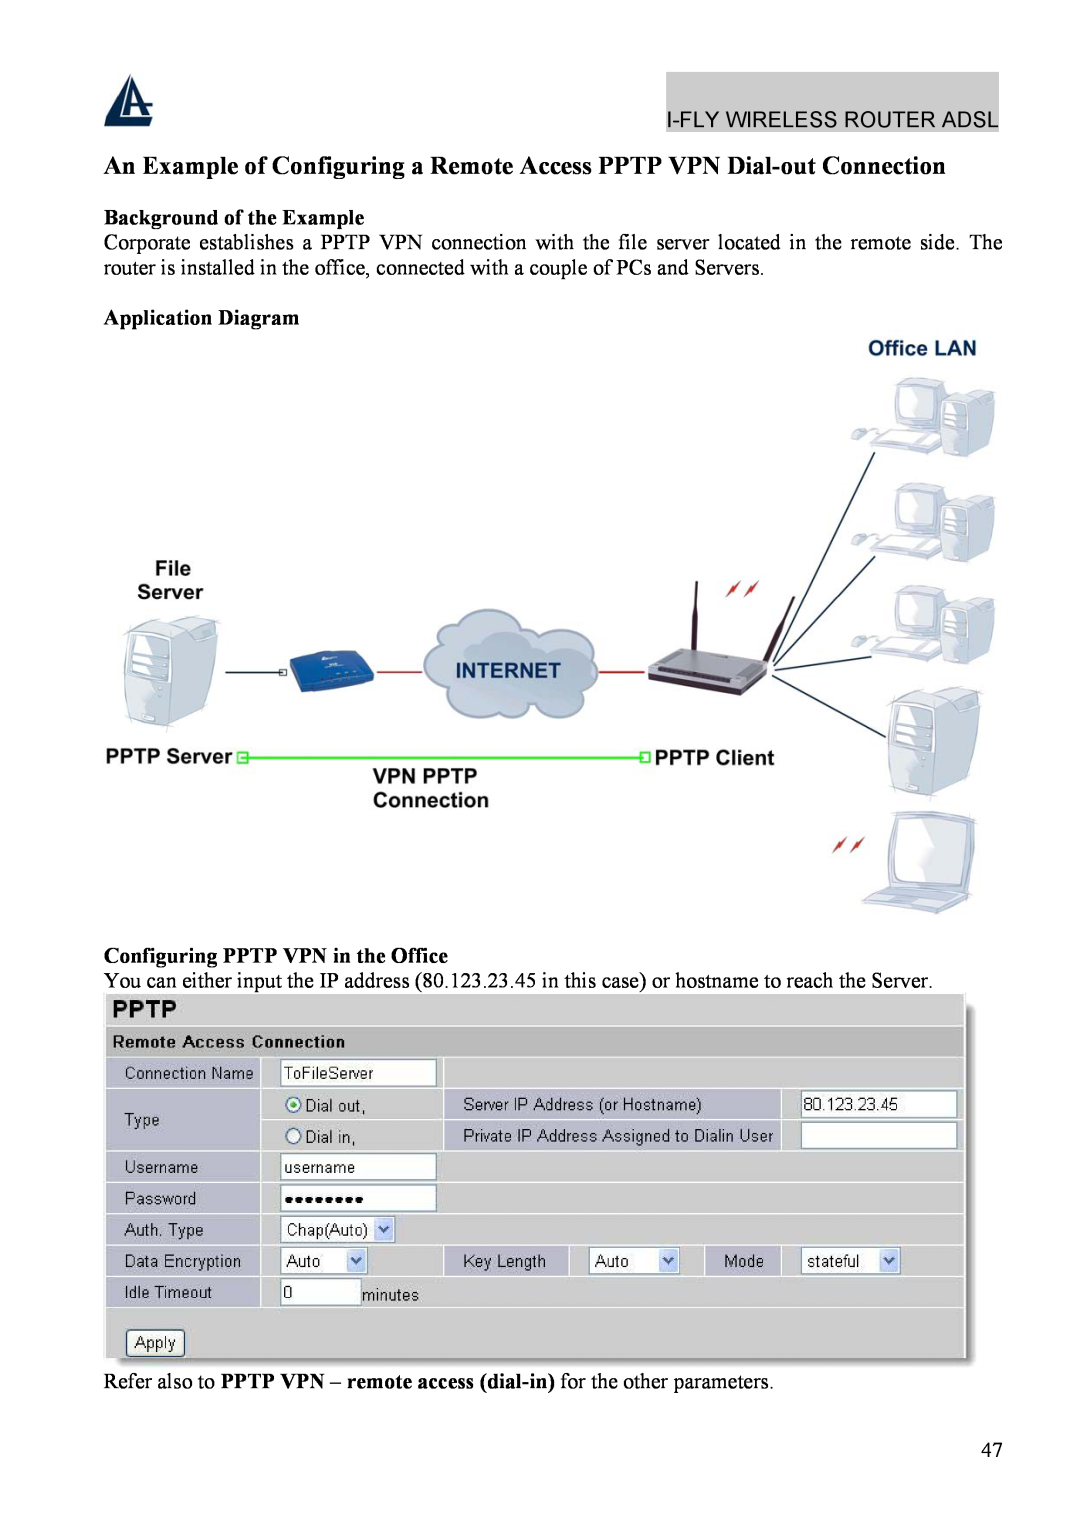 Atlantis Land A02-WRA4-54G manual Application Diagram Configuring PPTP VPN in the Office, Background of the Example 